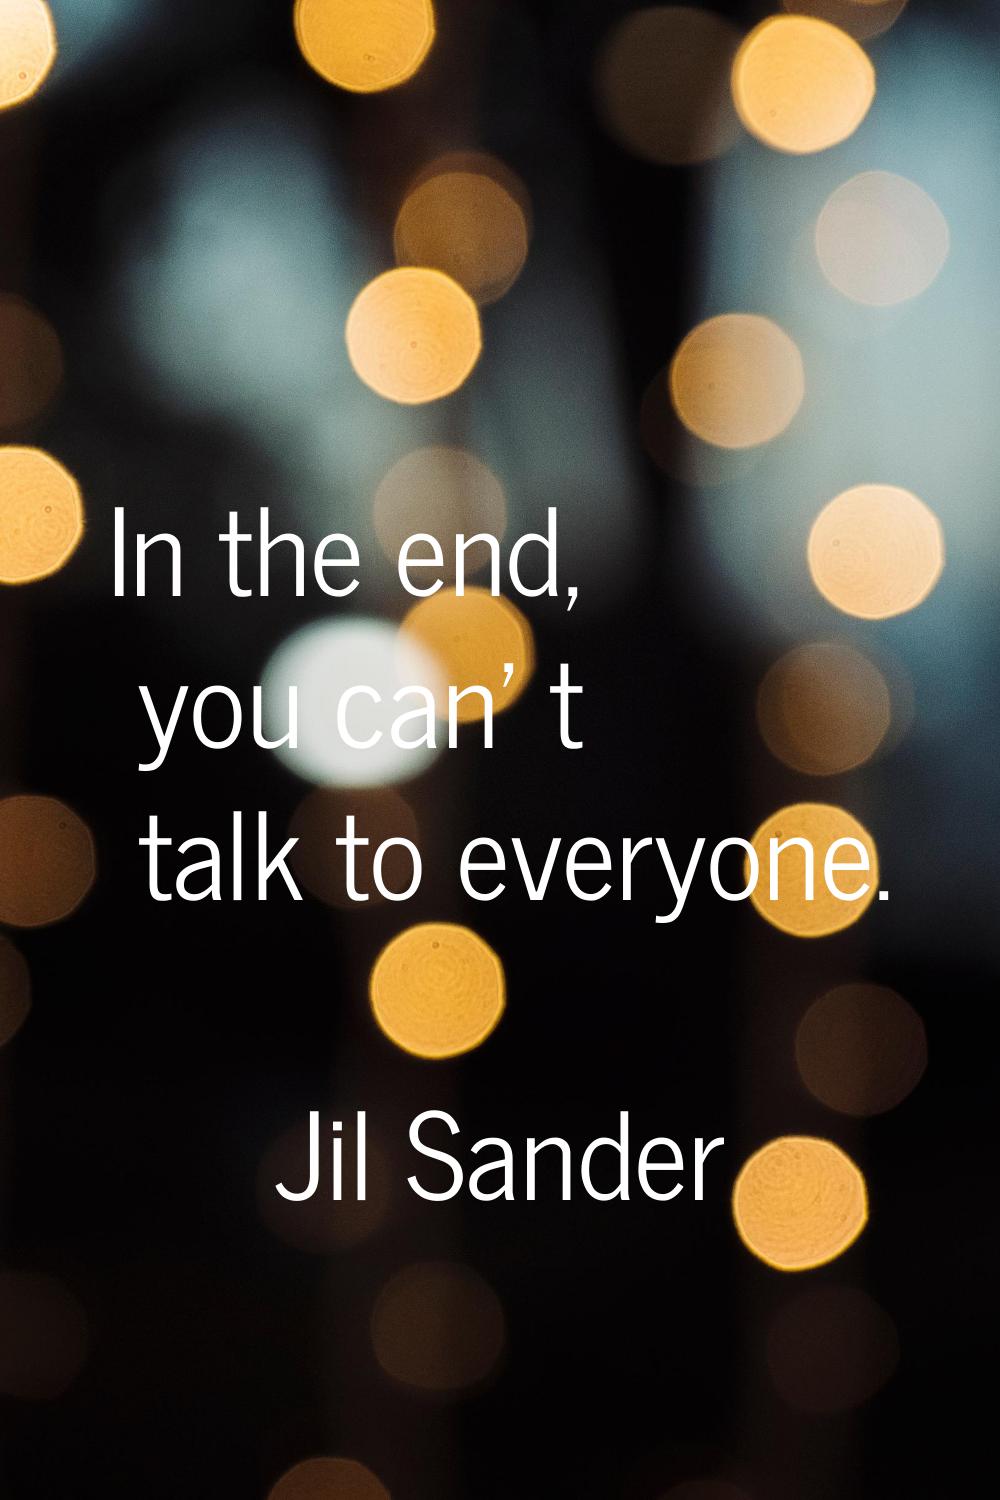 In the end, you can' t talk to everyone.